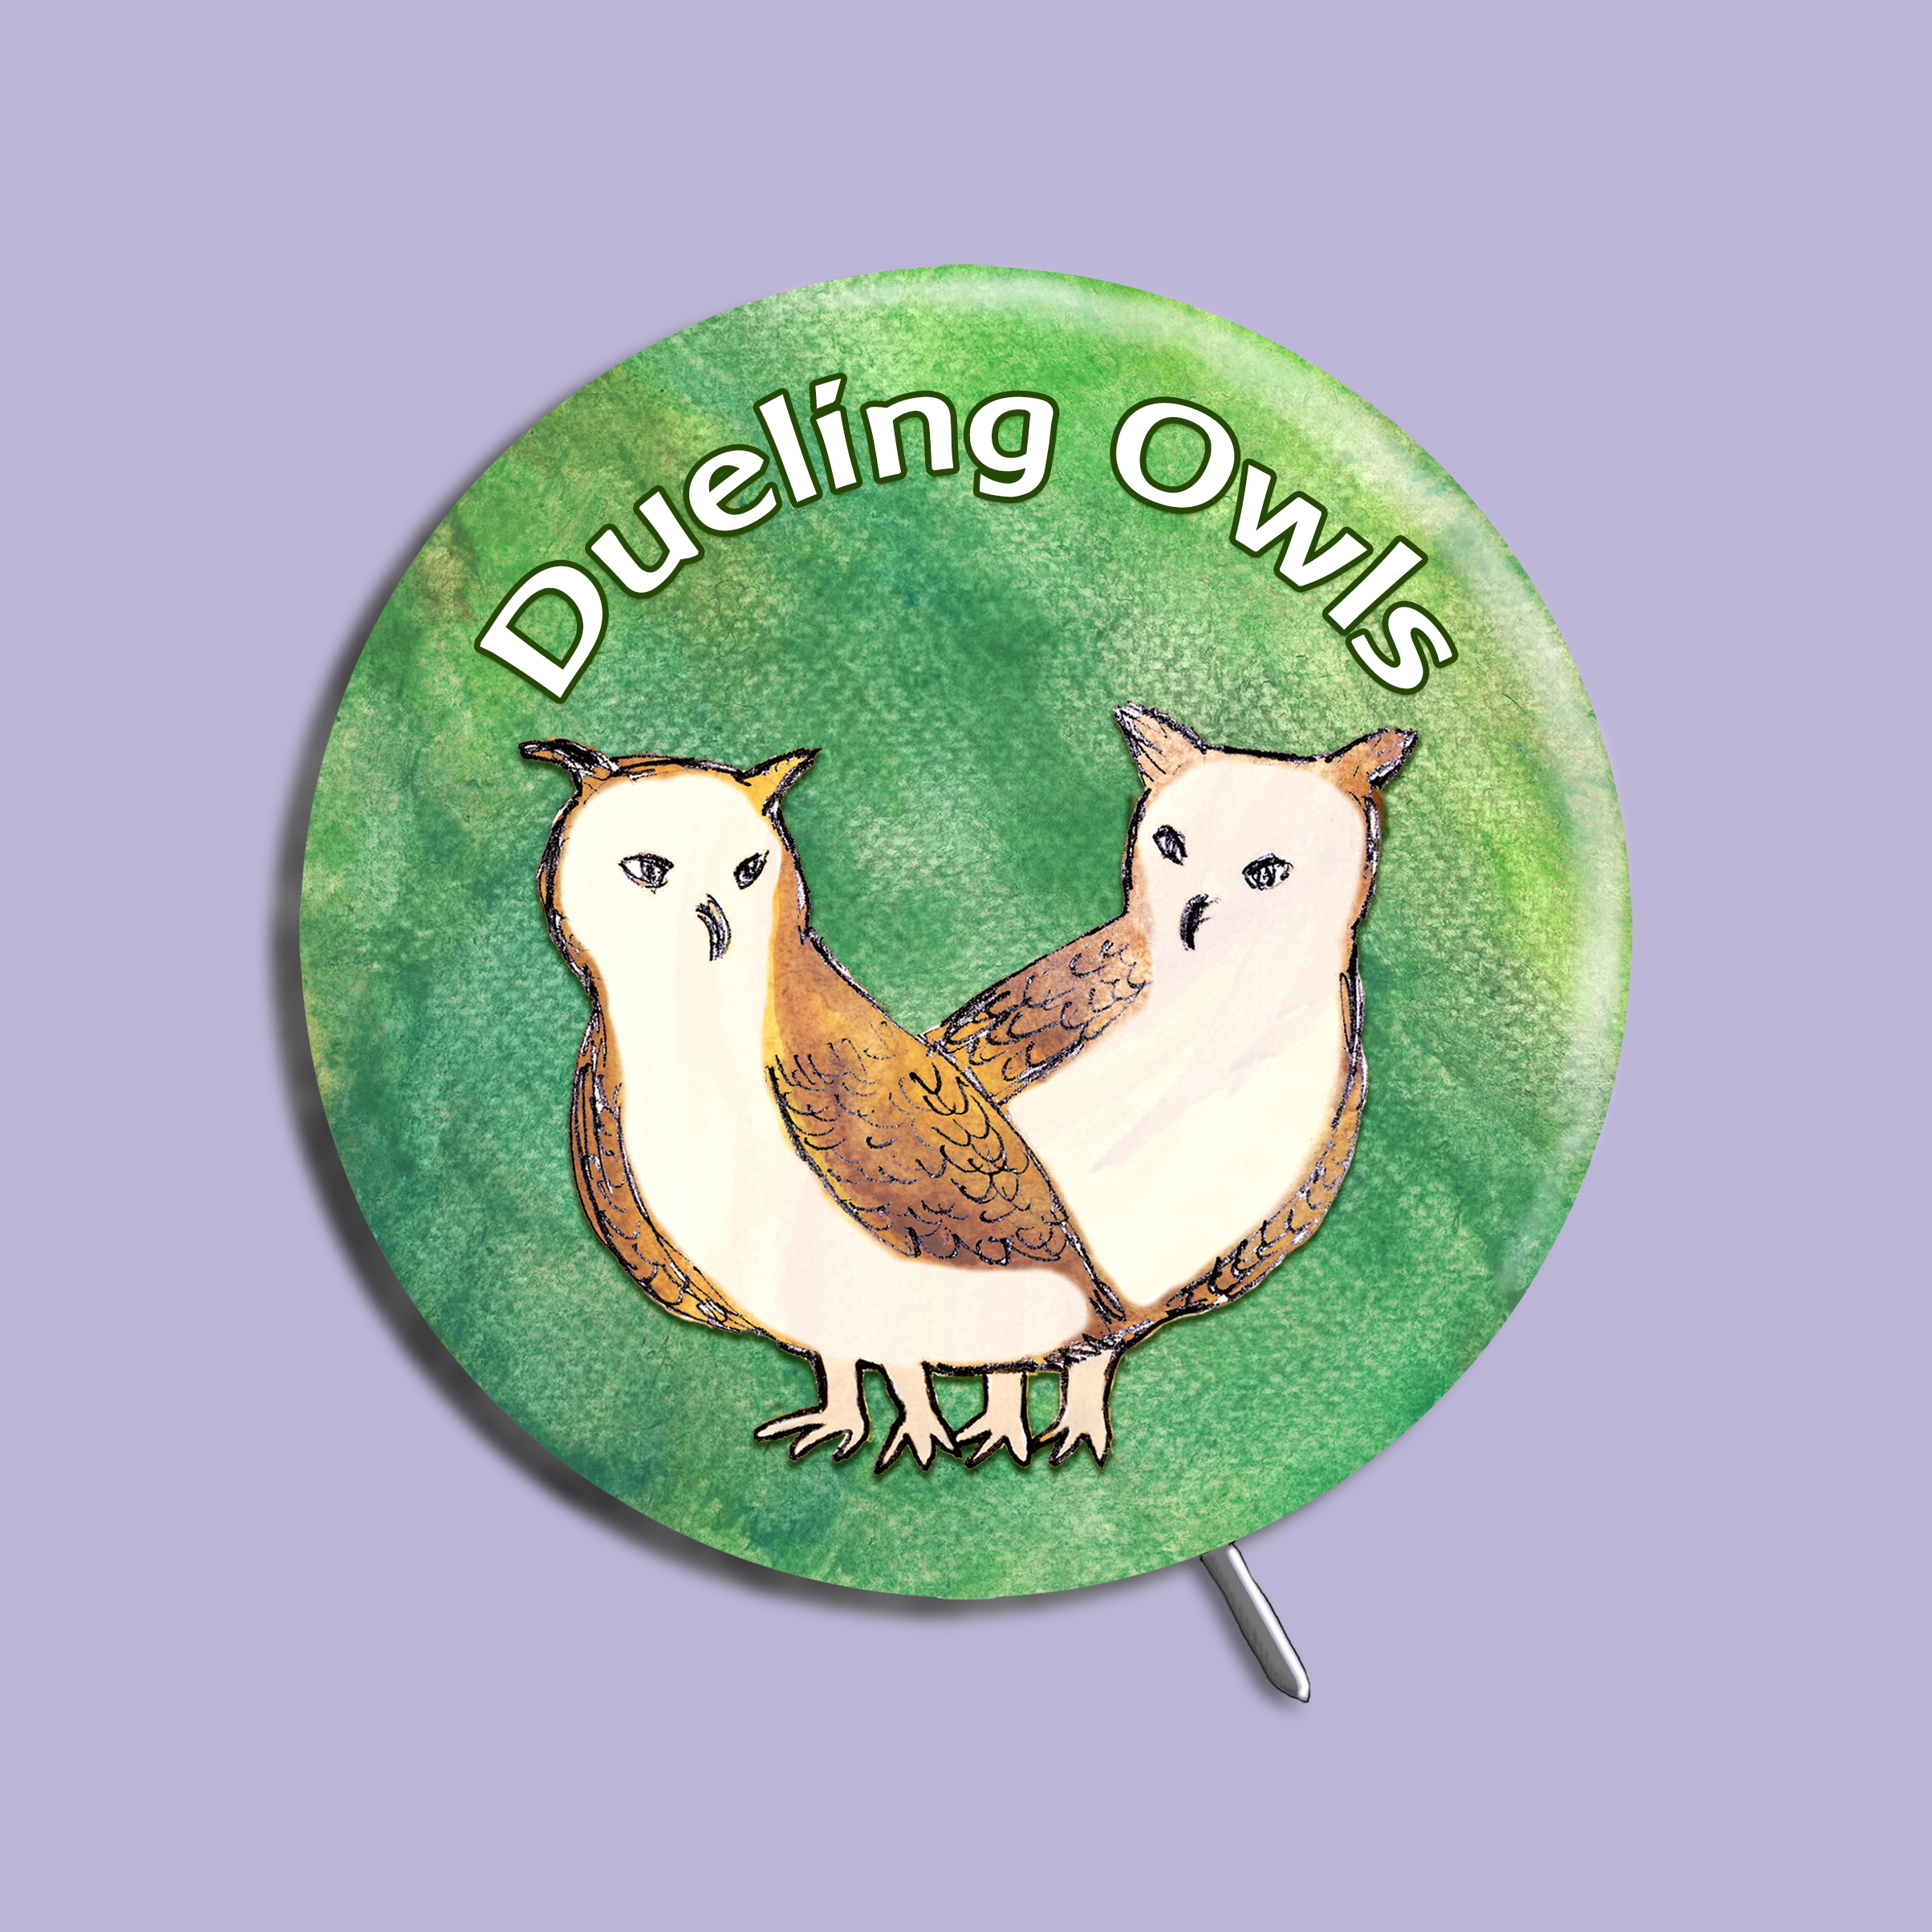 Image of a button with the band's name Dueling Owls curved over a drawing of two owls